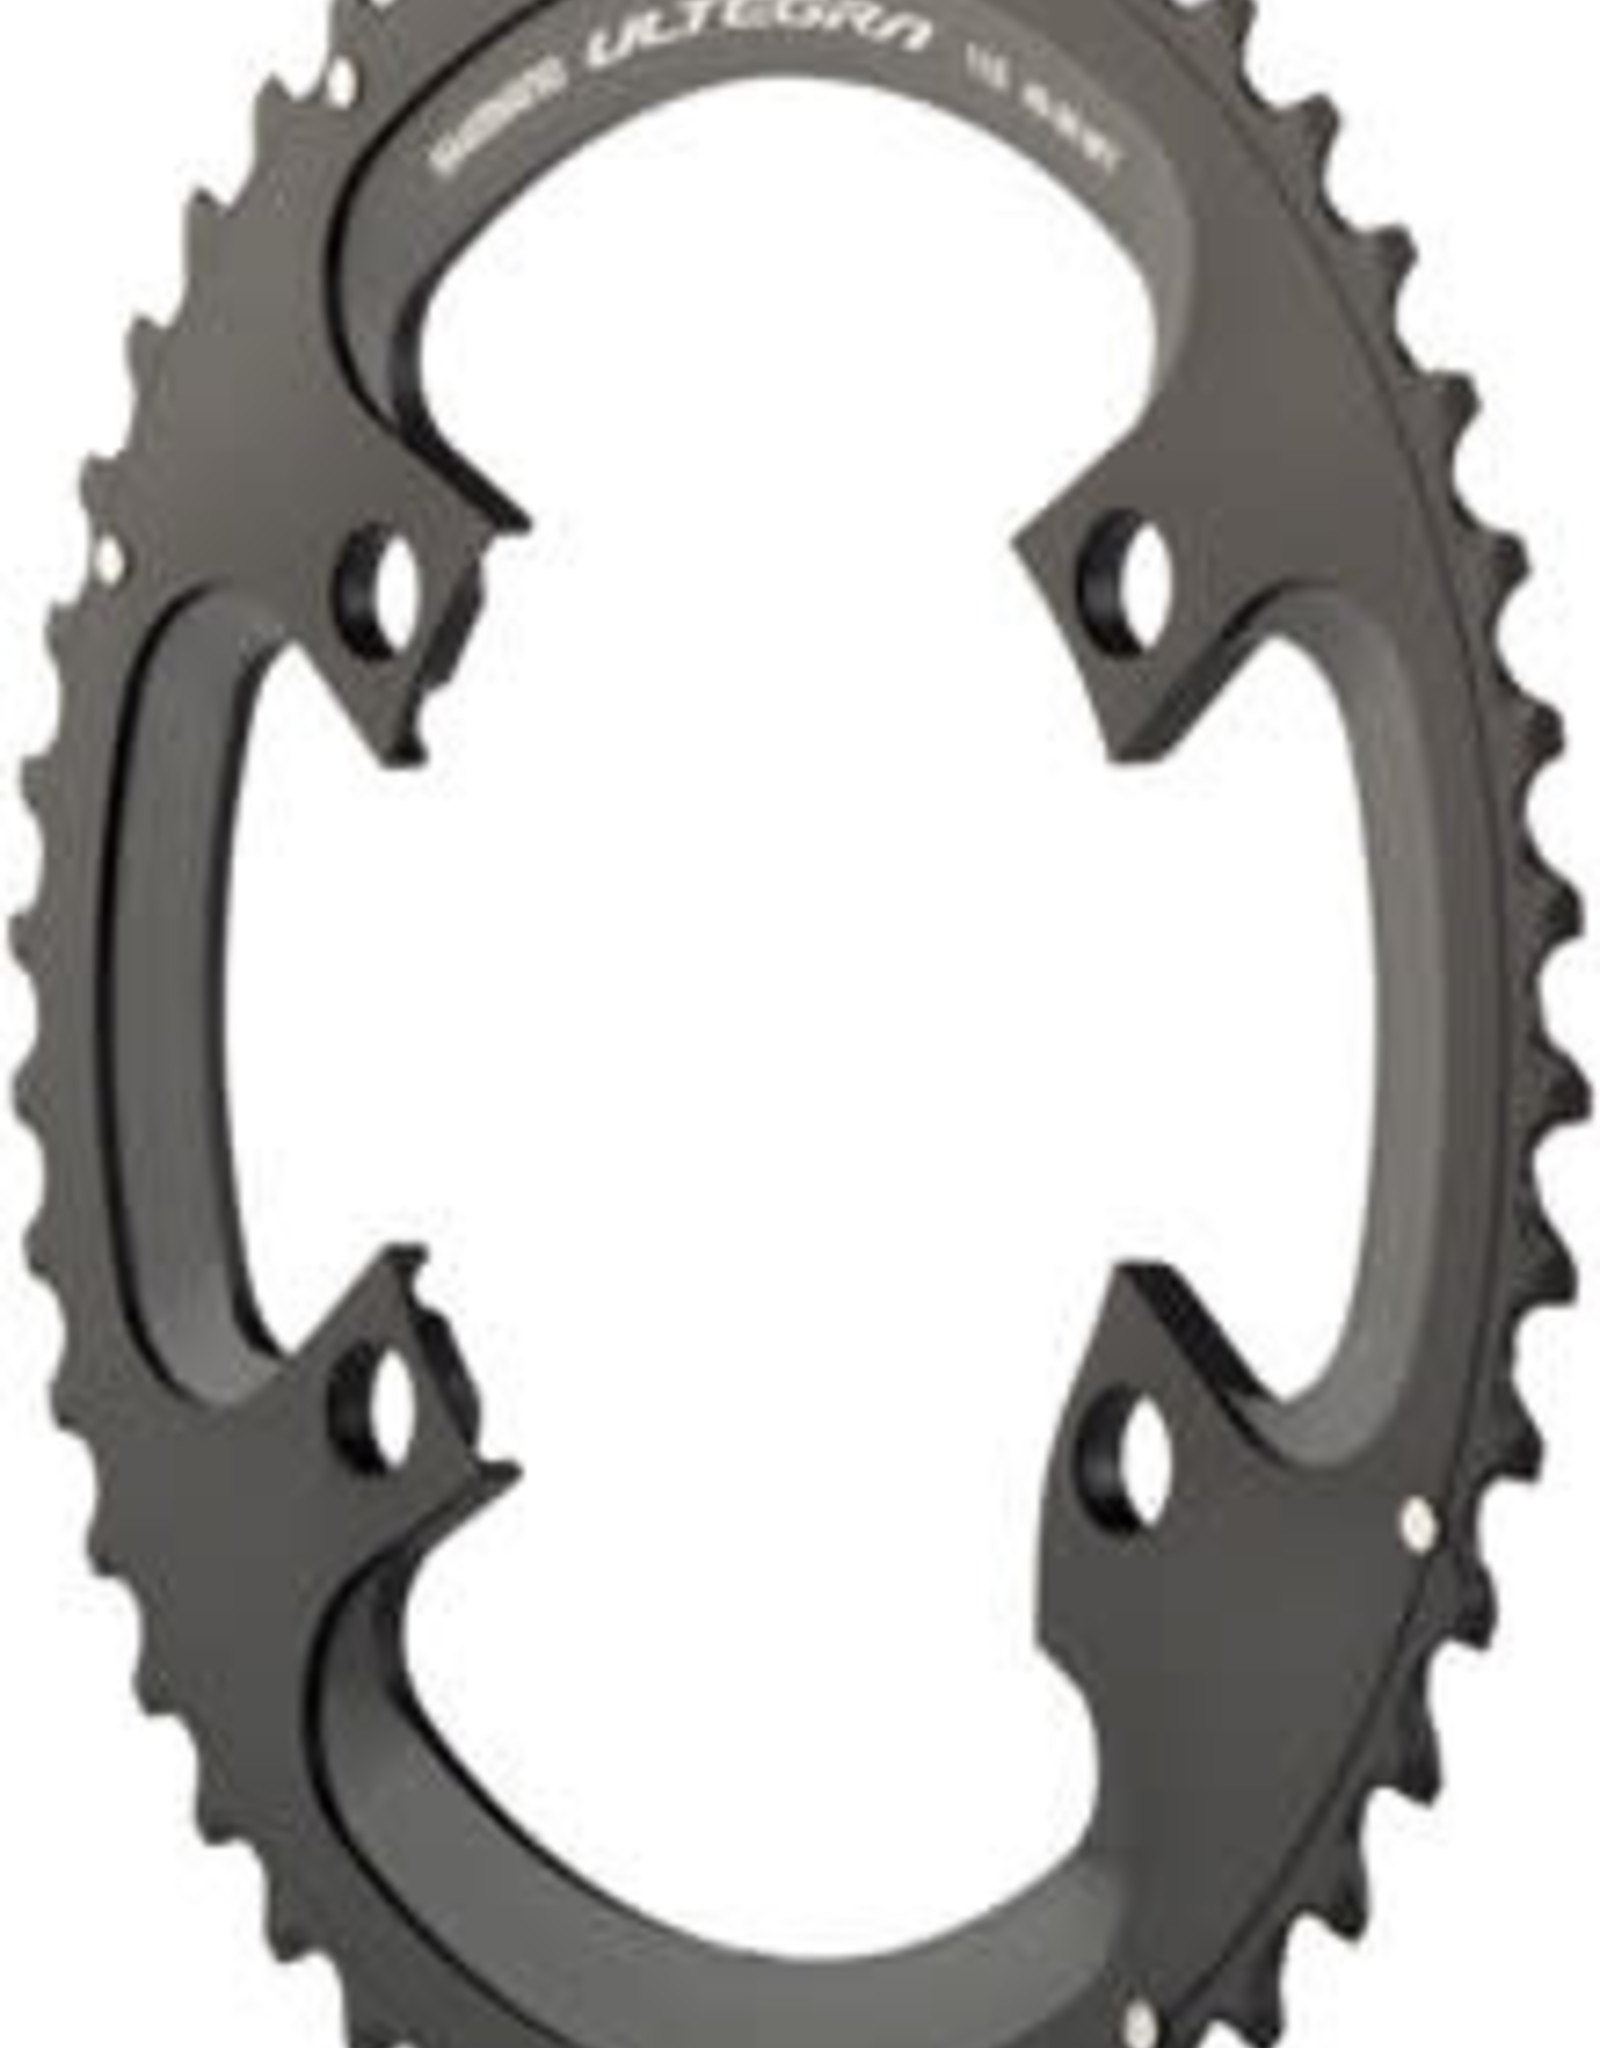 Shimano Shimano Ultegra R8000 46t 110mm 11-Speed Chainring for 36/52t or 36/46t